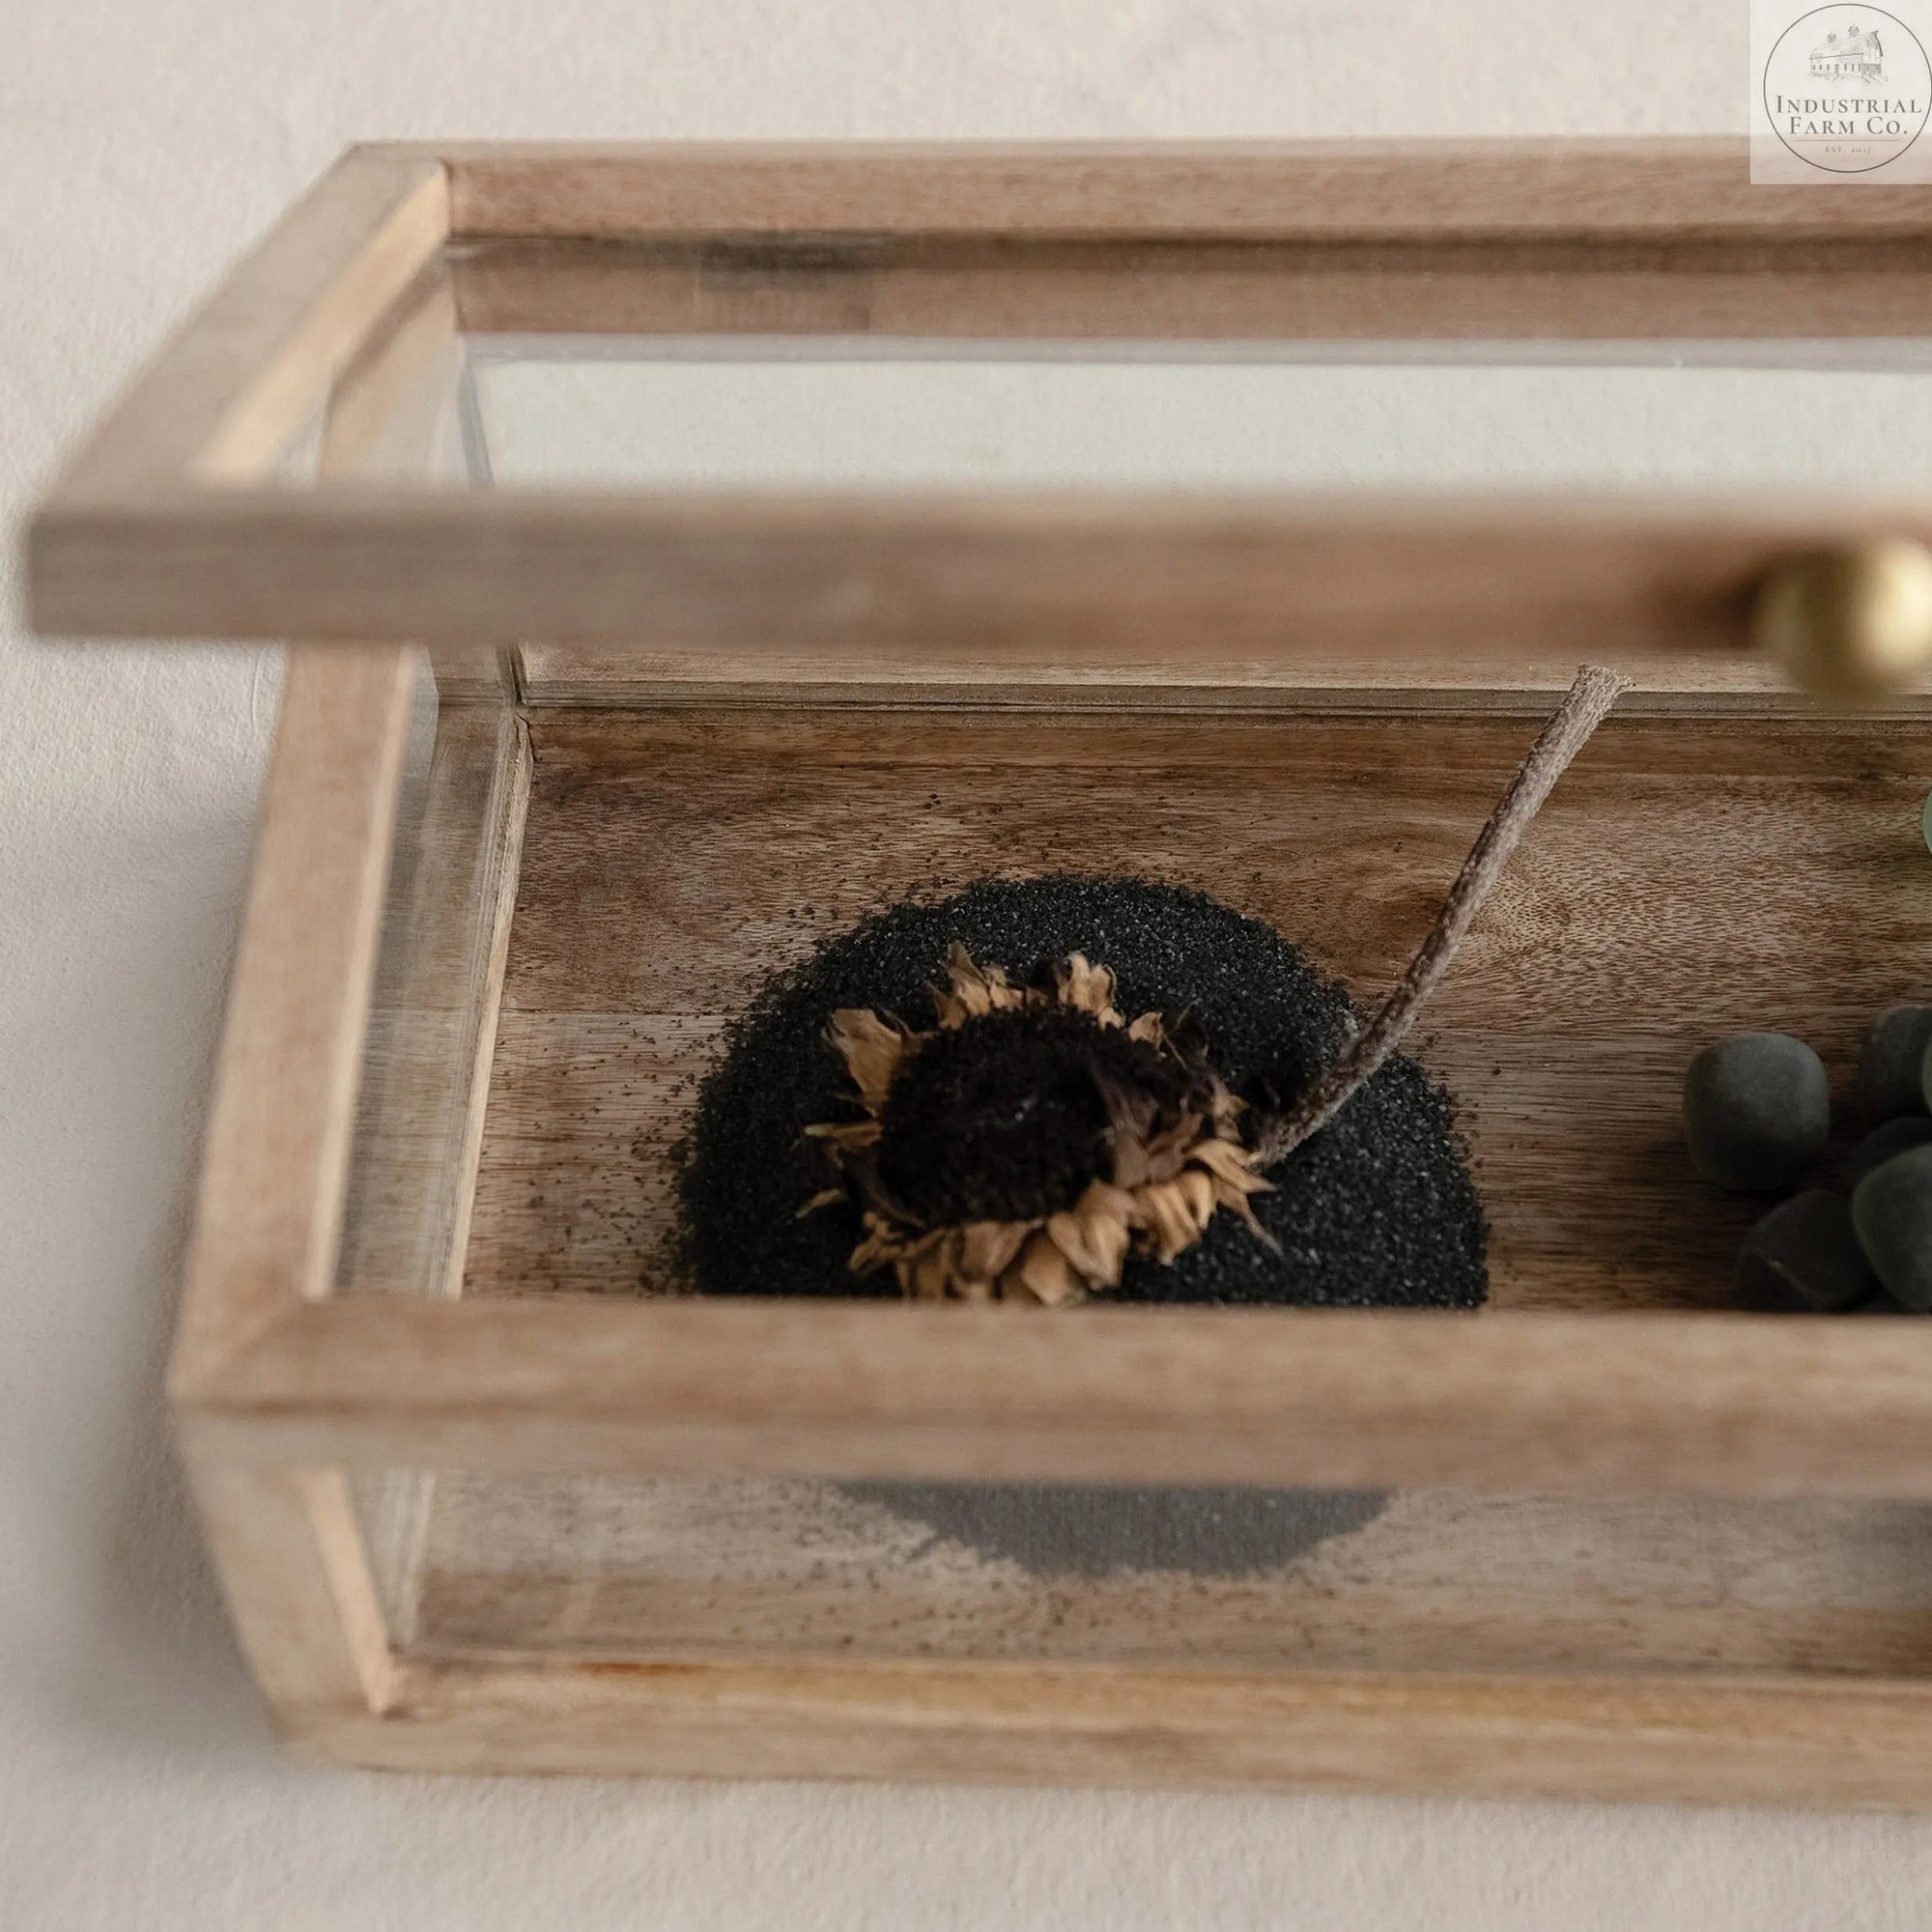 Natural Collection Wooden Decorative Display Box     | Industrial Farm Co